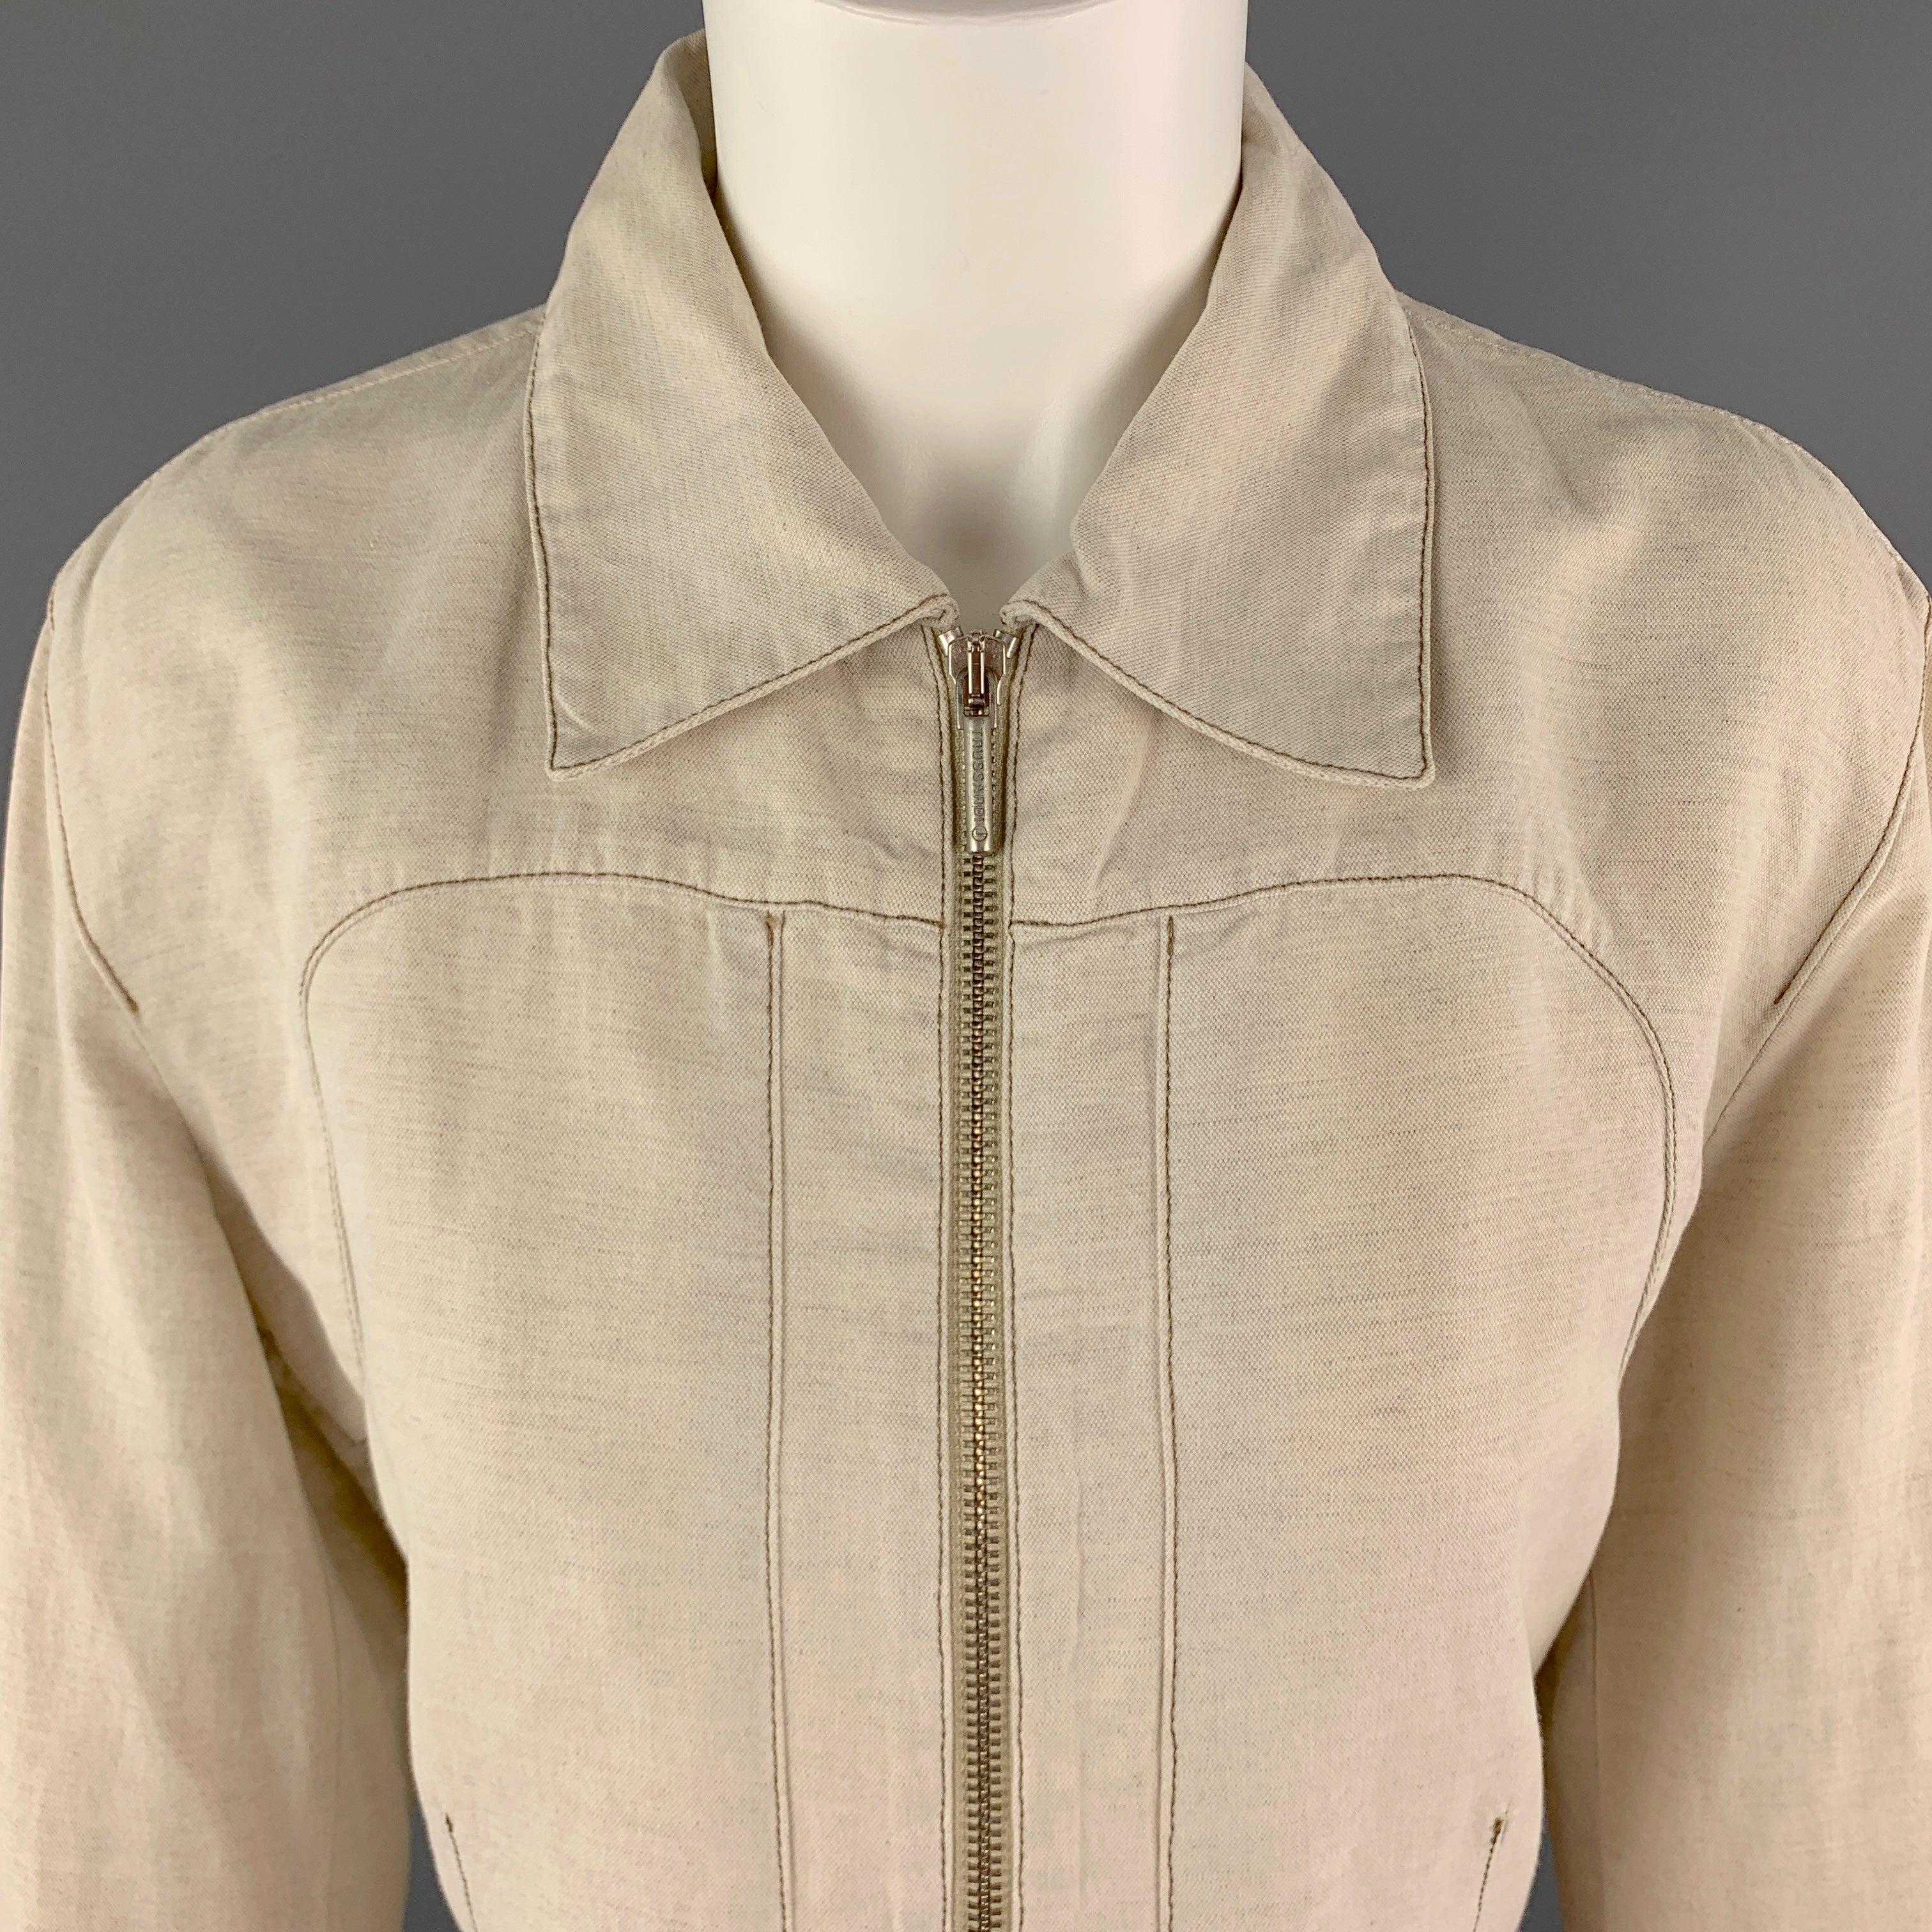 TRUSSARDI Jacket comes in a beige tone in a solid cotton / flax material, with a spread collar, contrast stitch, zip front, unbuttoned cuffs, belt at back, unlined. Minor wear, with marks at back. Made in Italy.
Very Good Pre-Owned Condition.